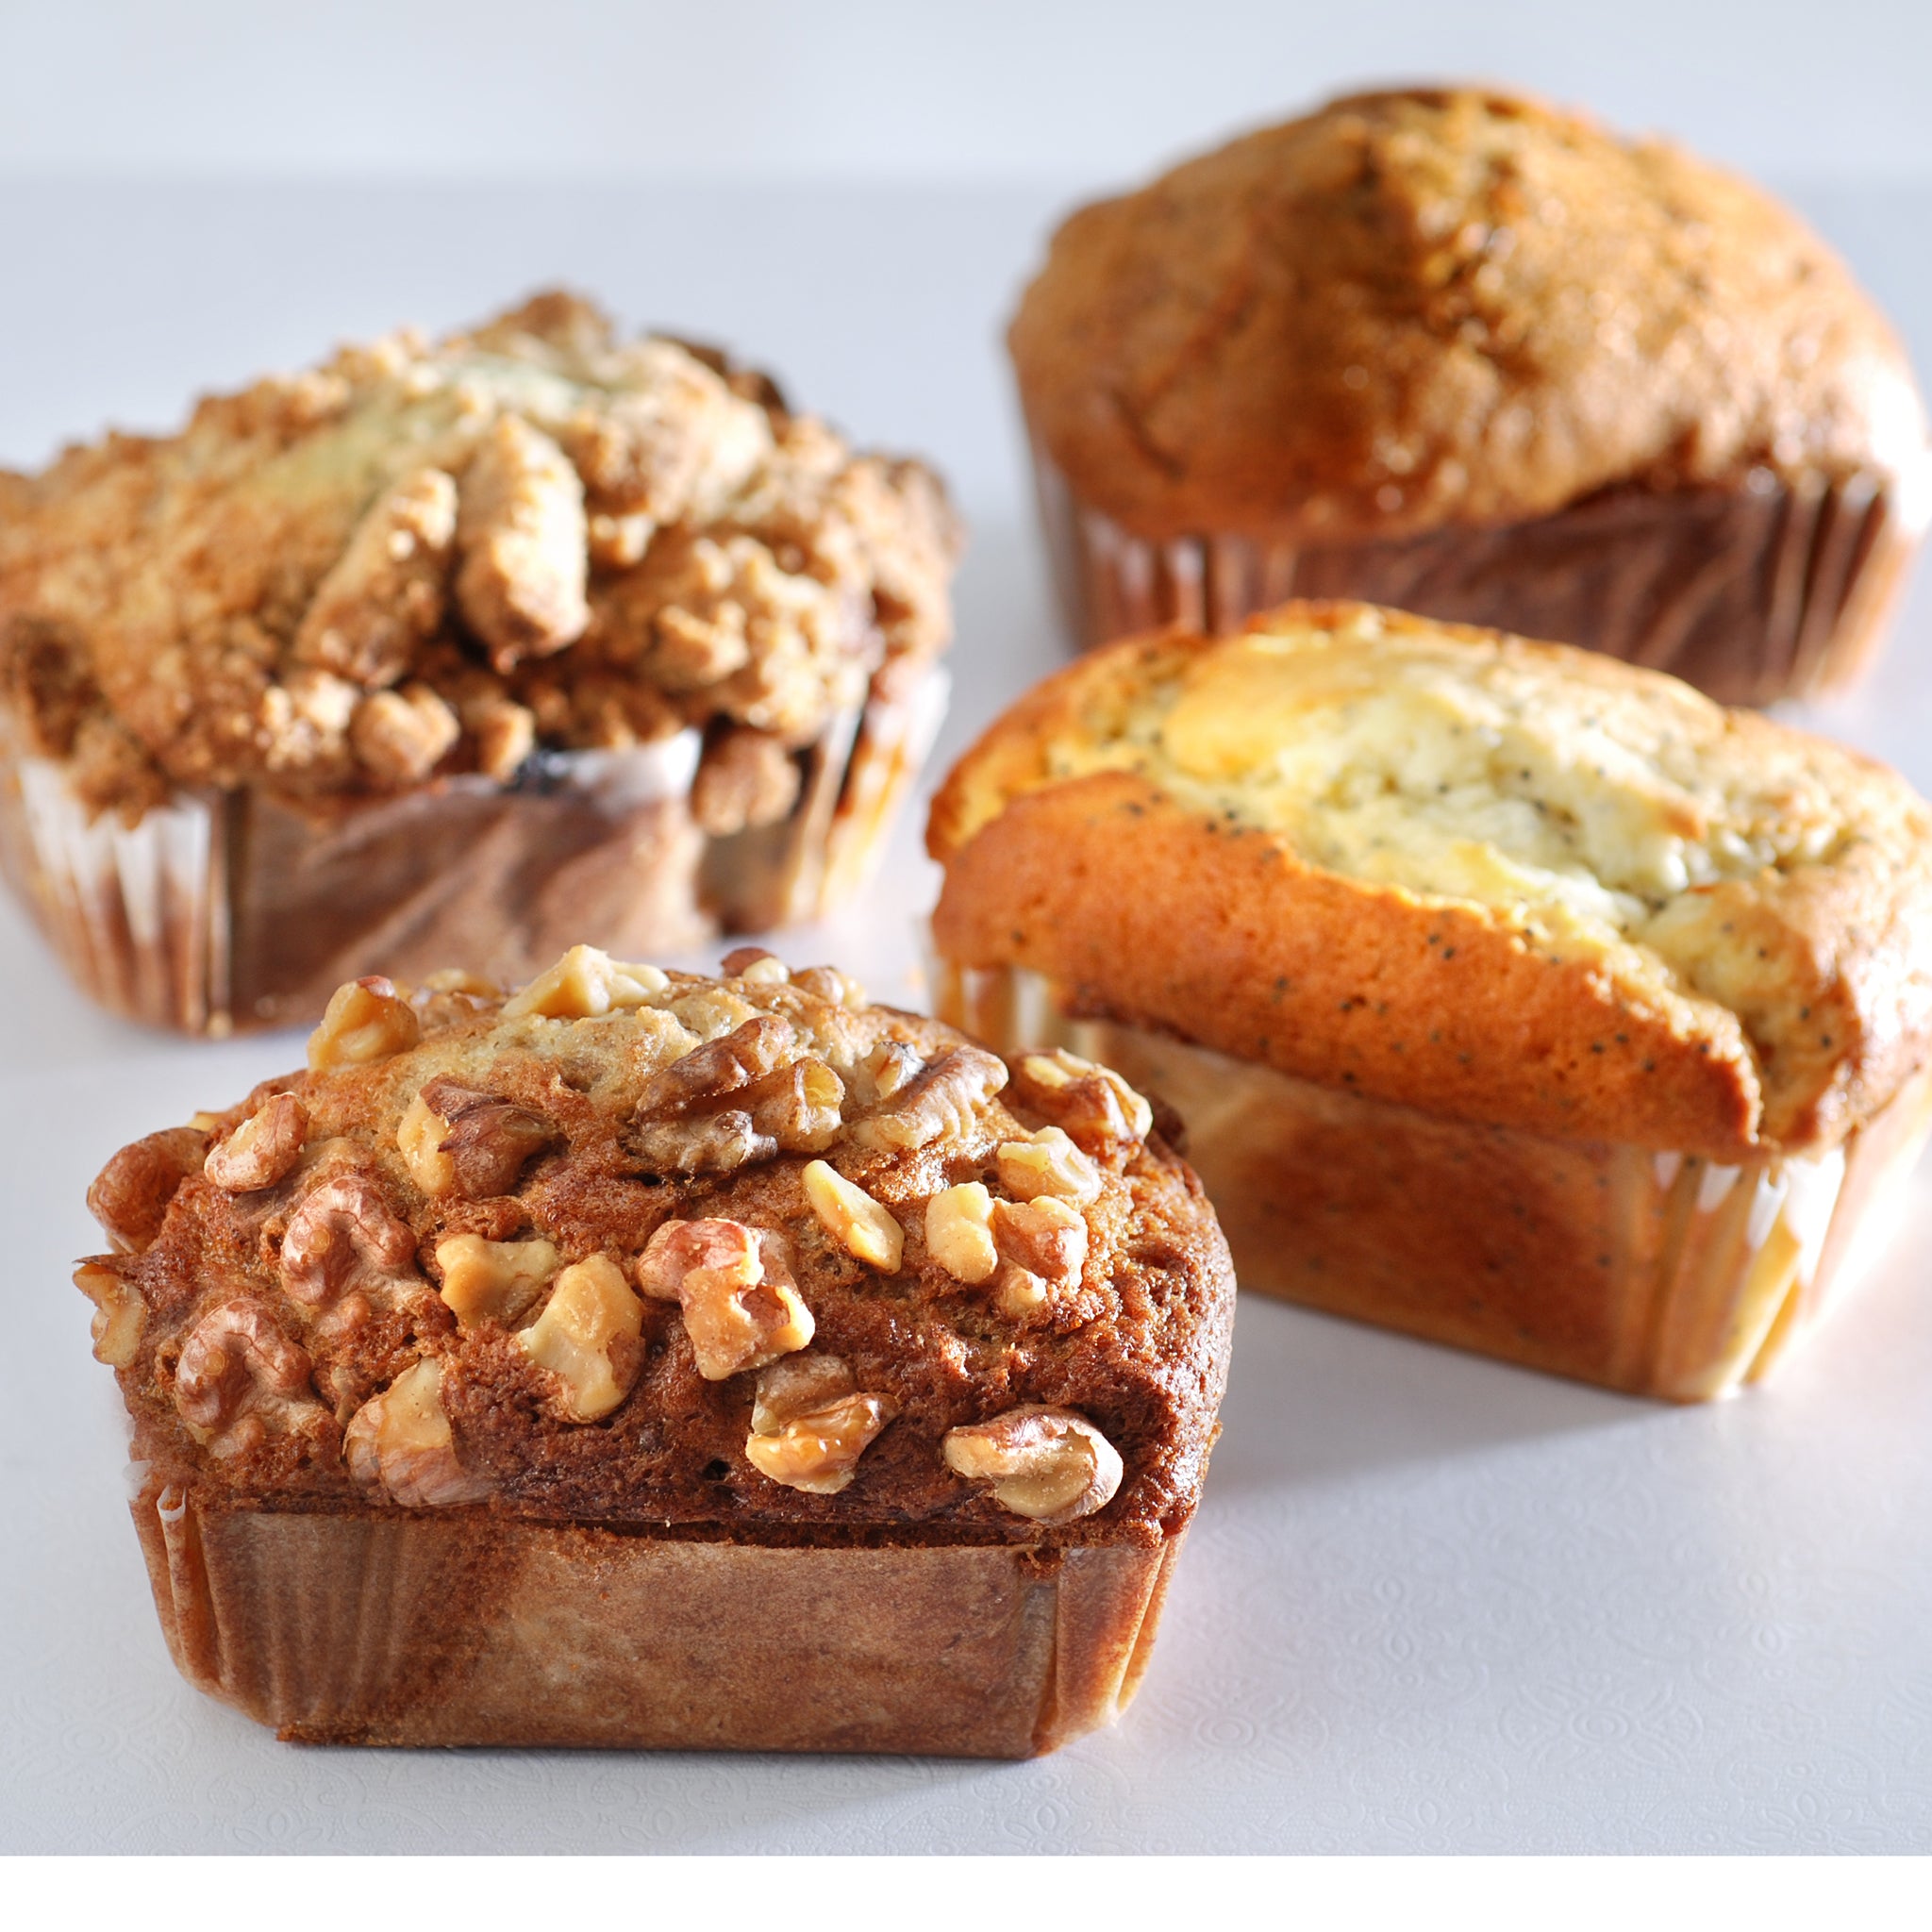 Gourmet Loaf Cakes | Bakery in Chicago